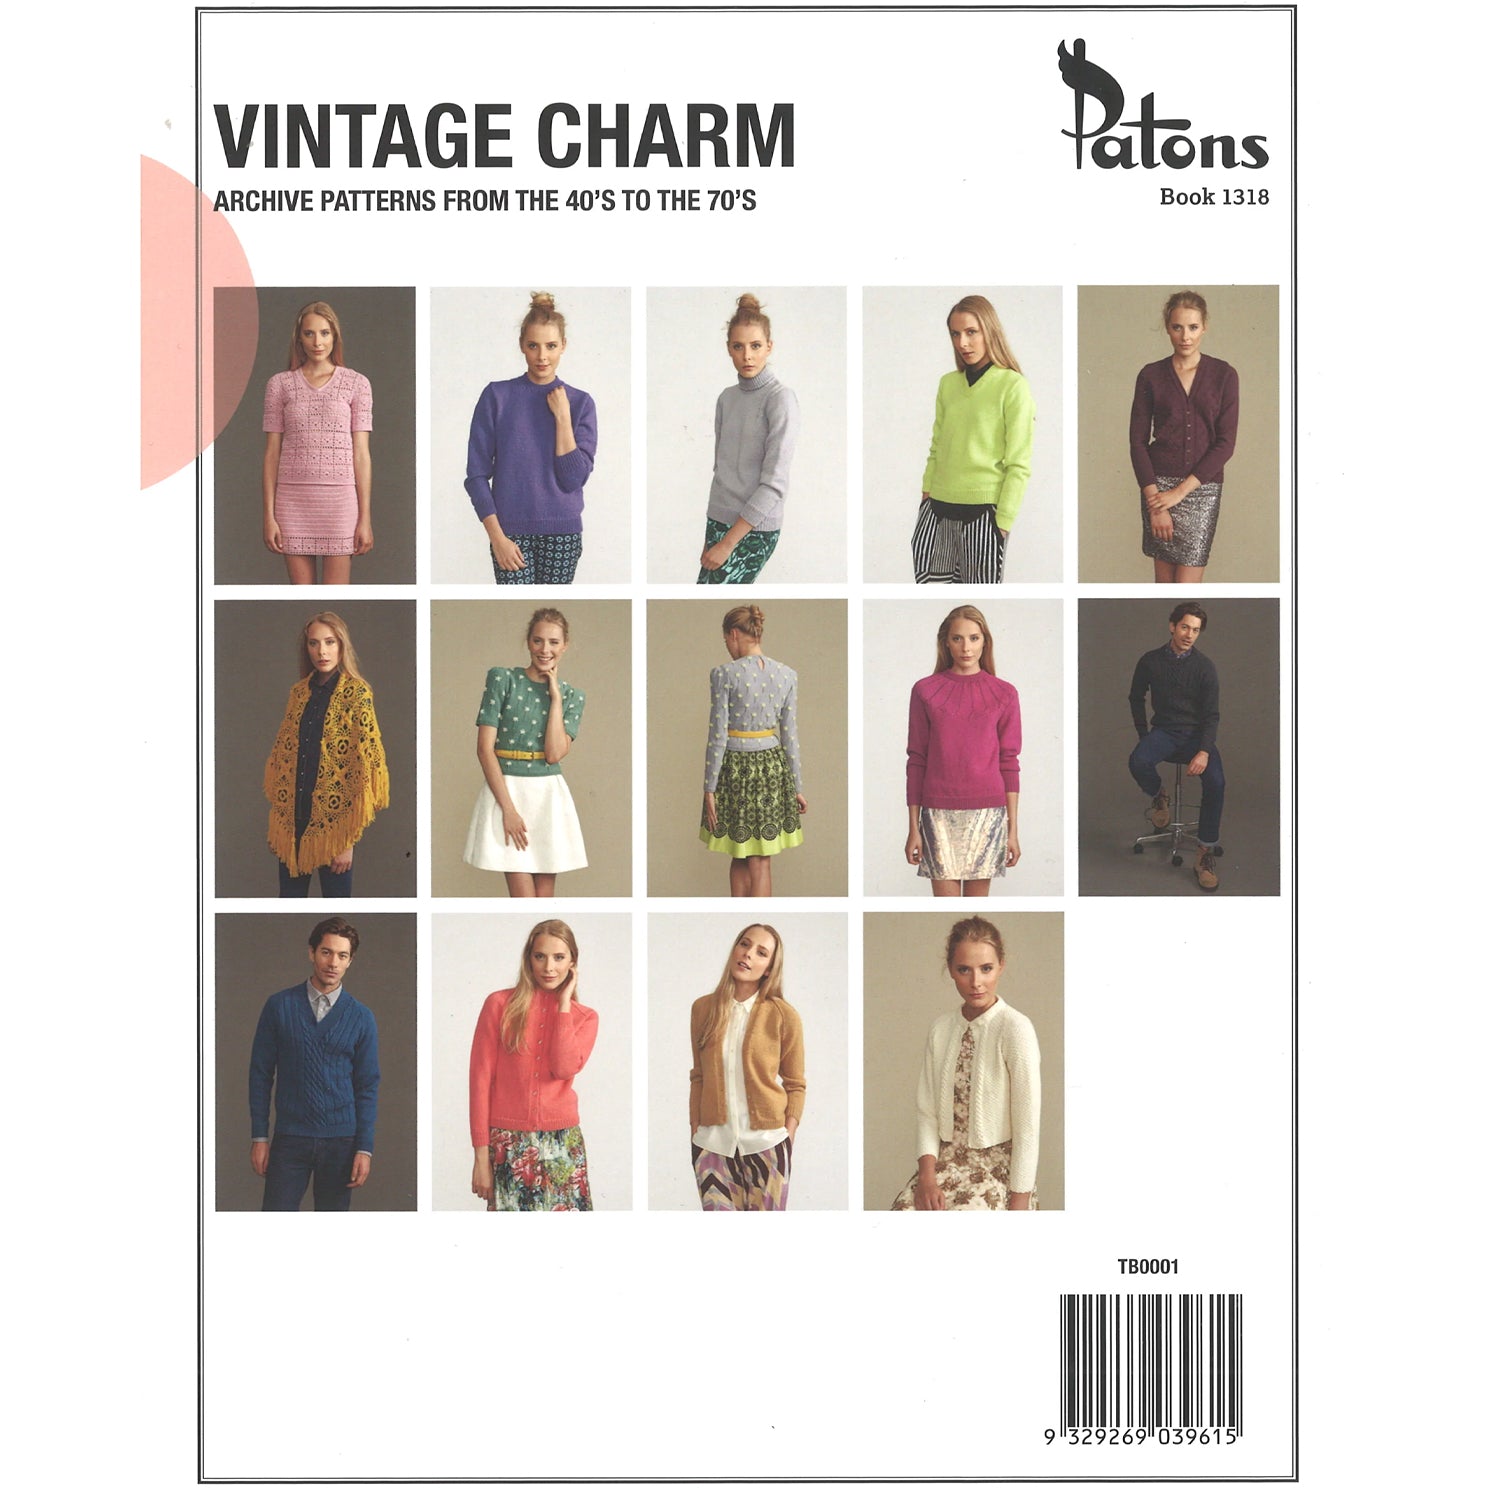 Patons Vintage Charm Book 1318